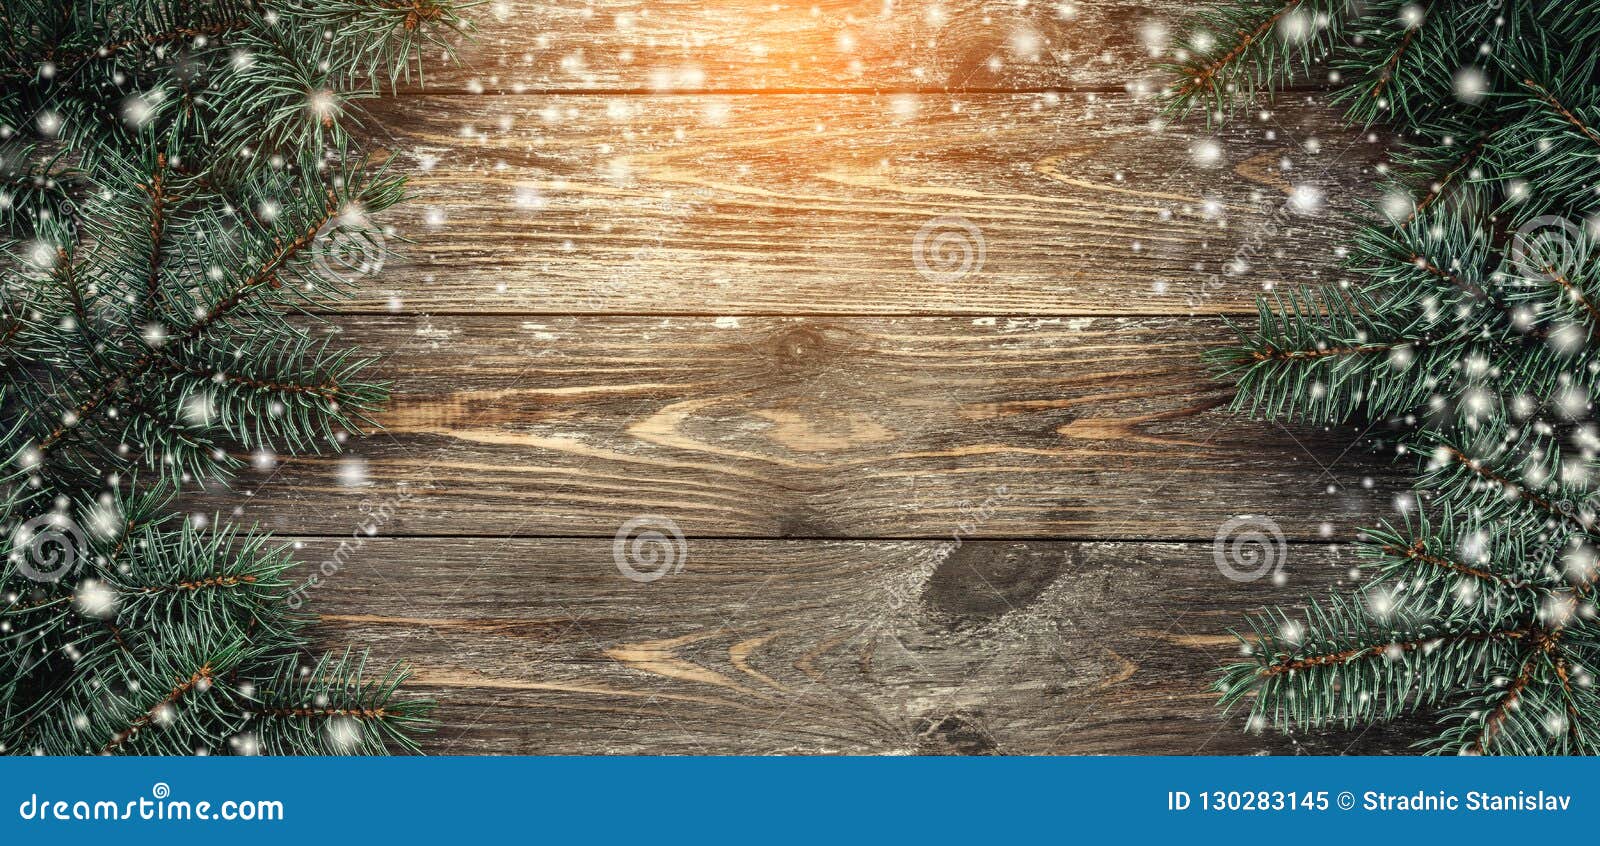 Old Wood Background with Fir Branches. Space for a Greeting Message ...